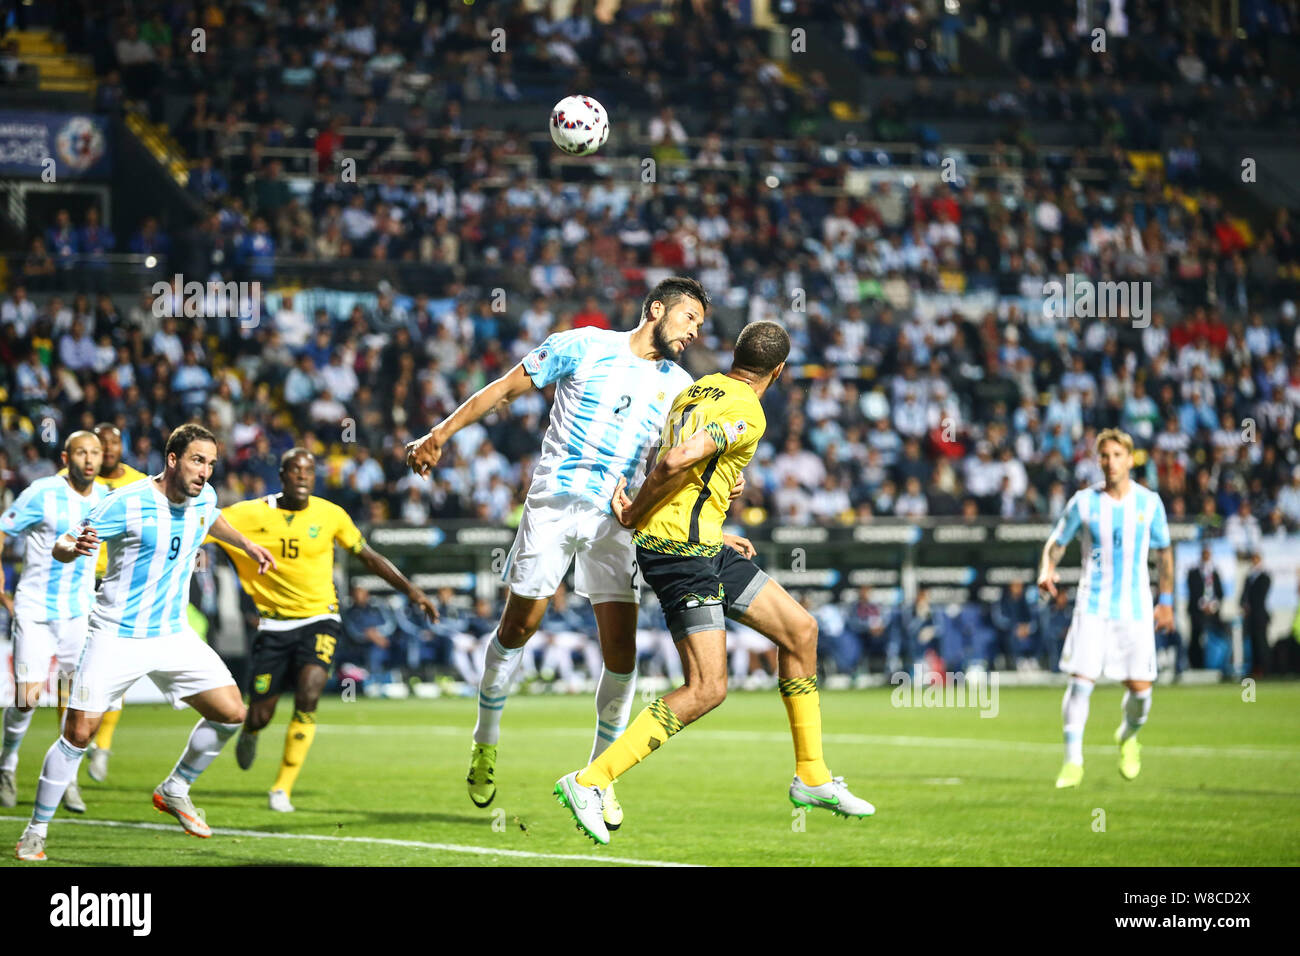 Argentina's Ezequiel Garay, center left, challenges Jamaica's Michael Hector, center right, during a Copa America Group B soccer match at the Sausalit Stock Photo